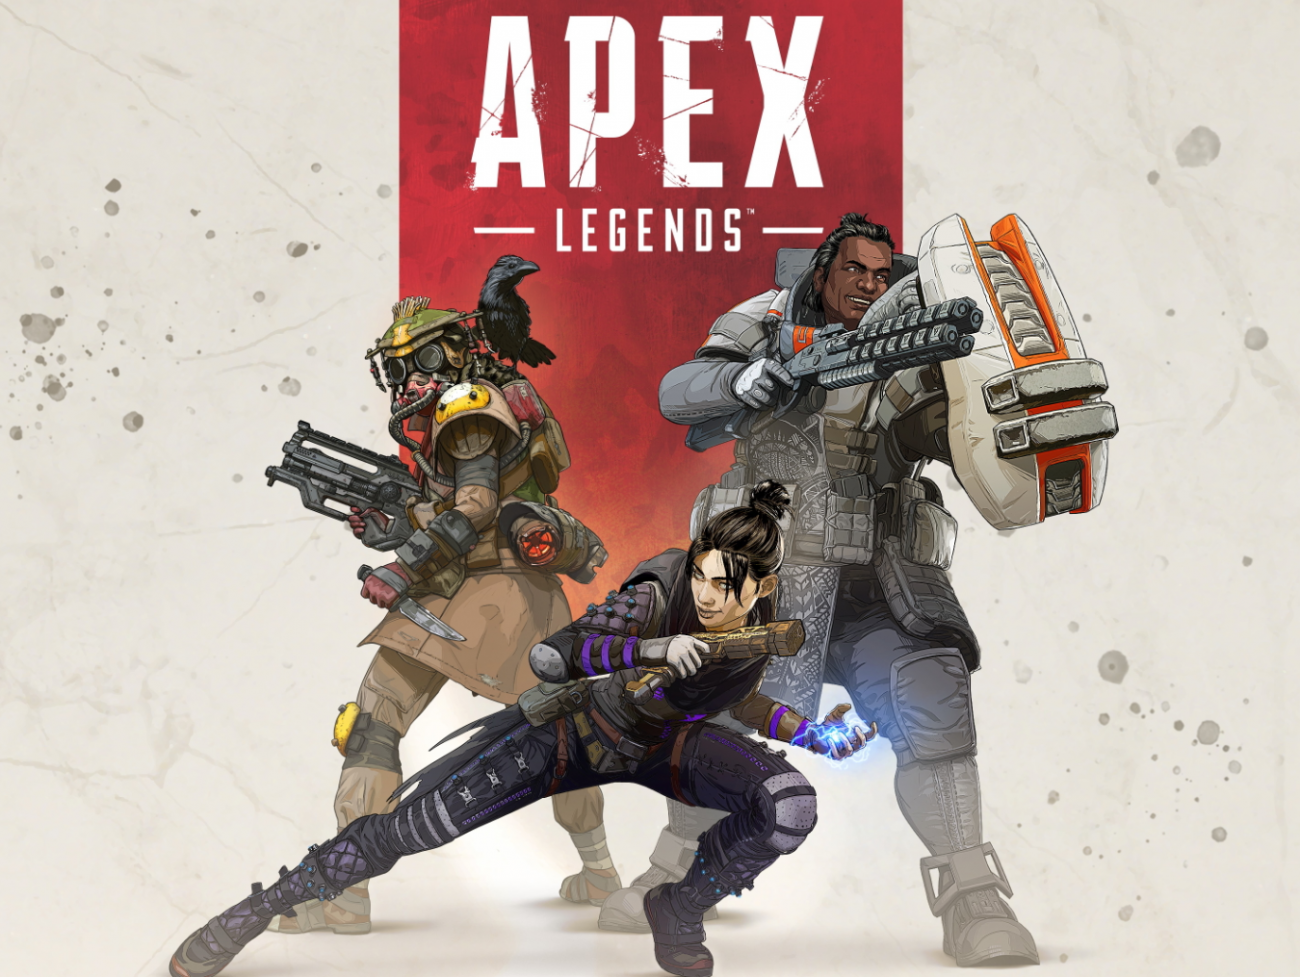 Apex Legends is coming to mobile devices and phones - Polygon